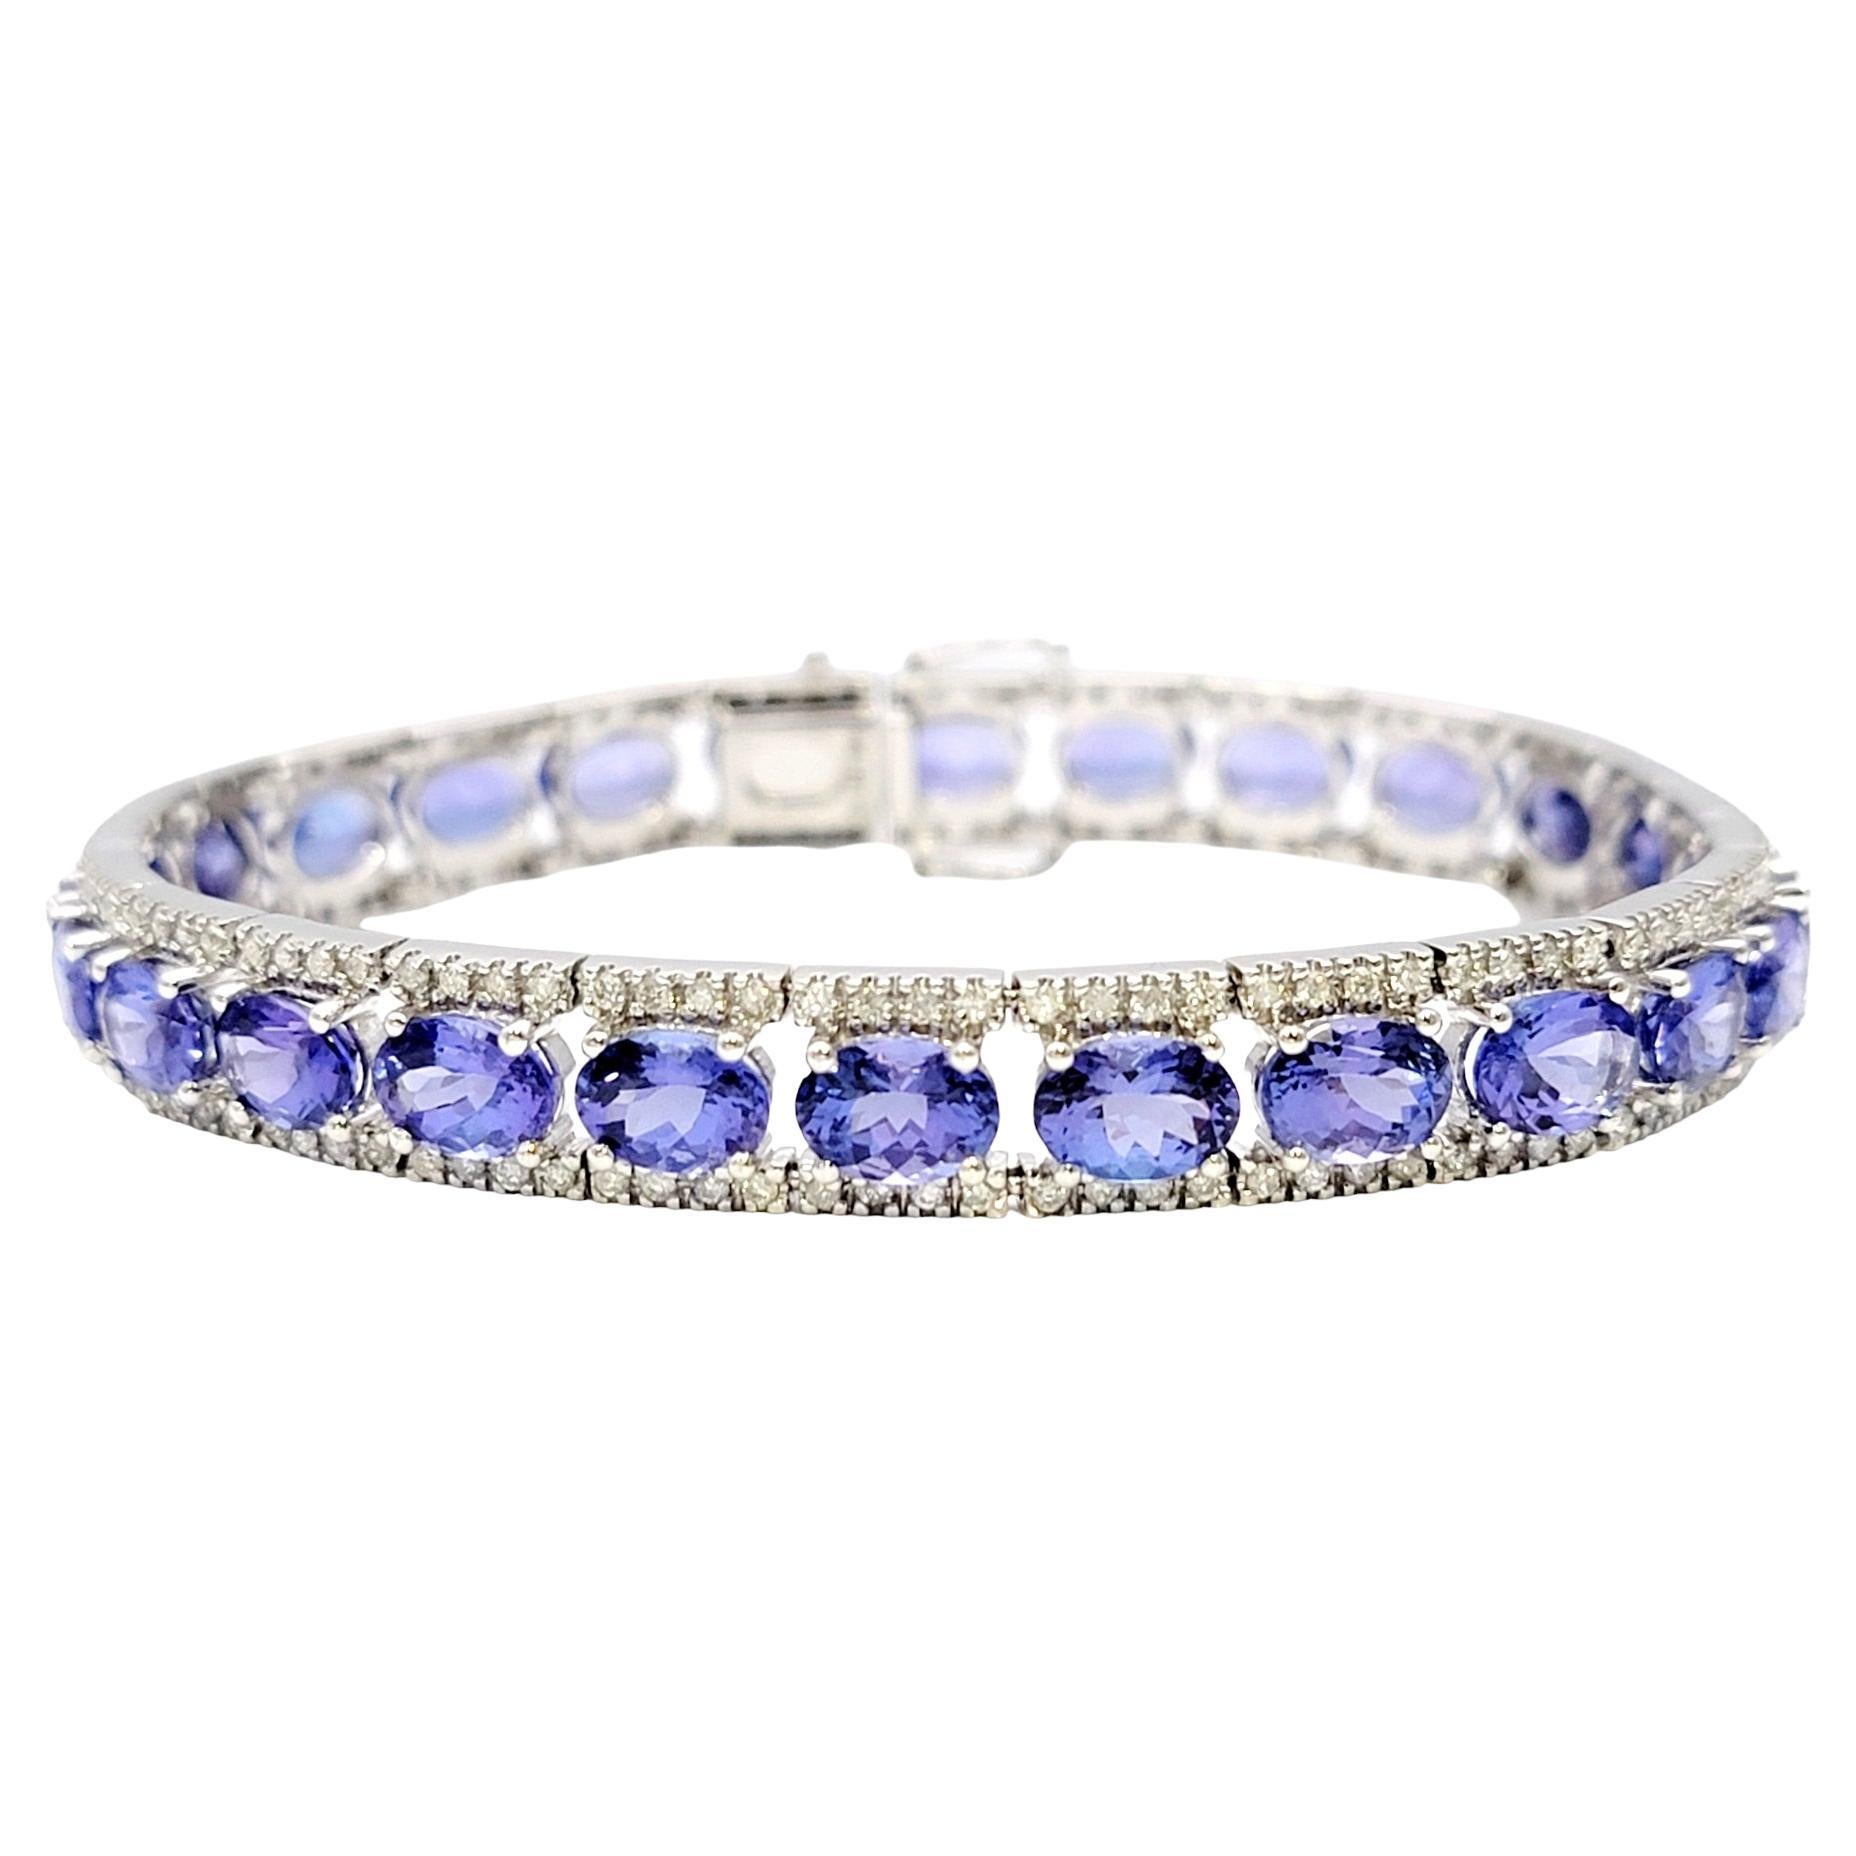 26.75 Carat Total Oval Tanzanite and Pave Diamond Line Bracelet in White Gold